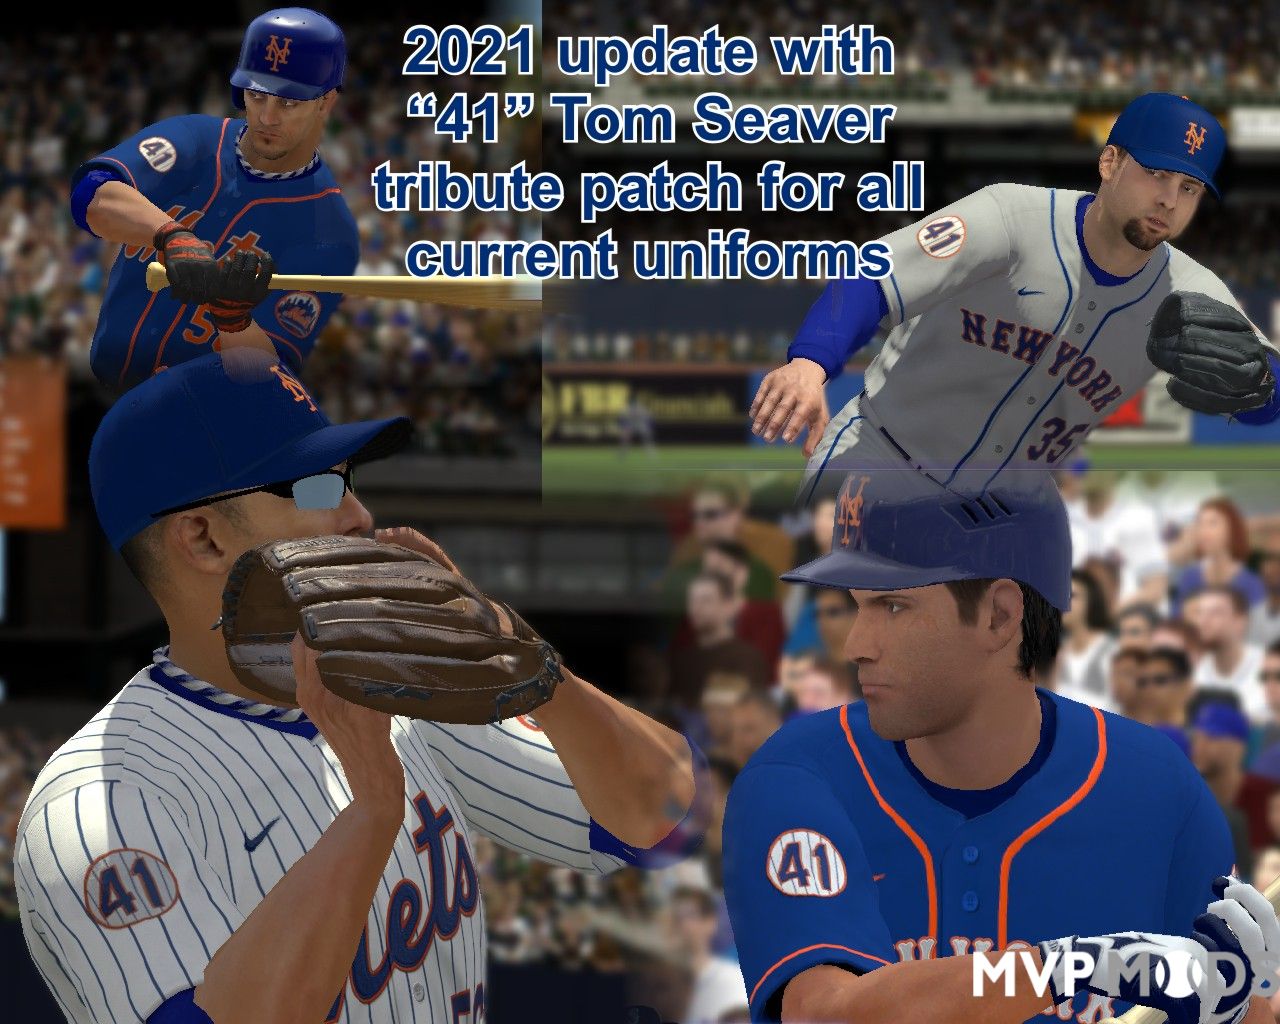 mets all white uniforms